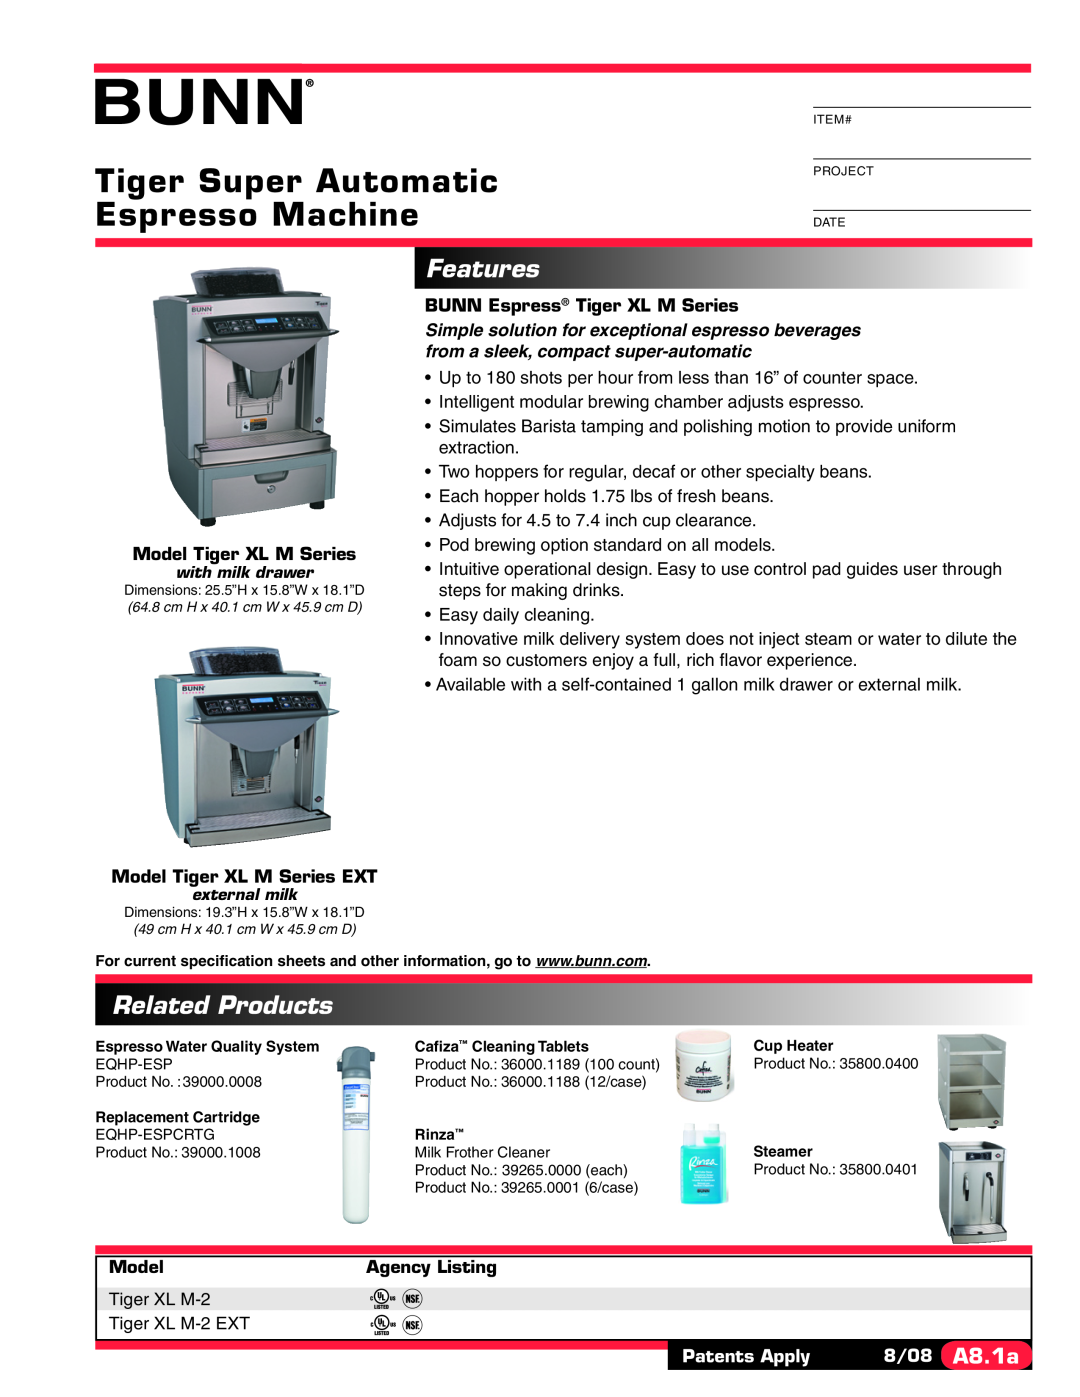 Bunn XL M-2 specifications Tiger Super Automatic Espresso Machine, Features, Related Products, Model Tiger XL M Series 